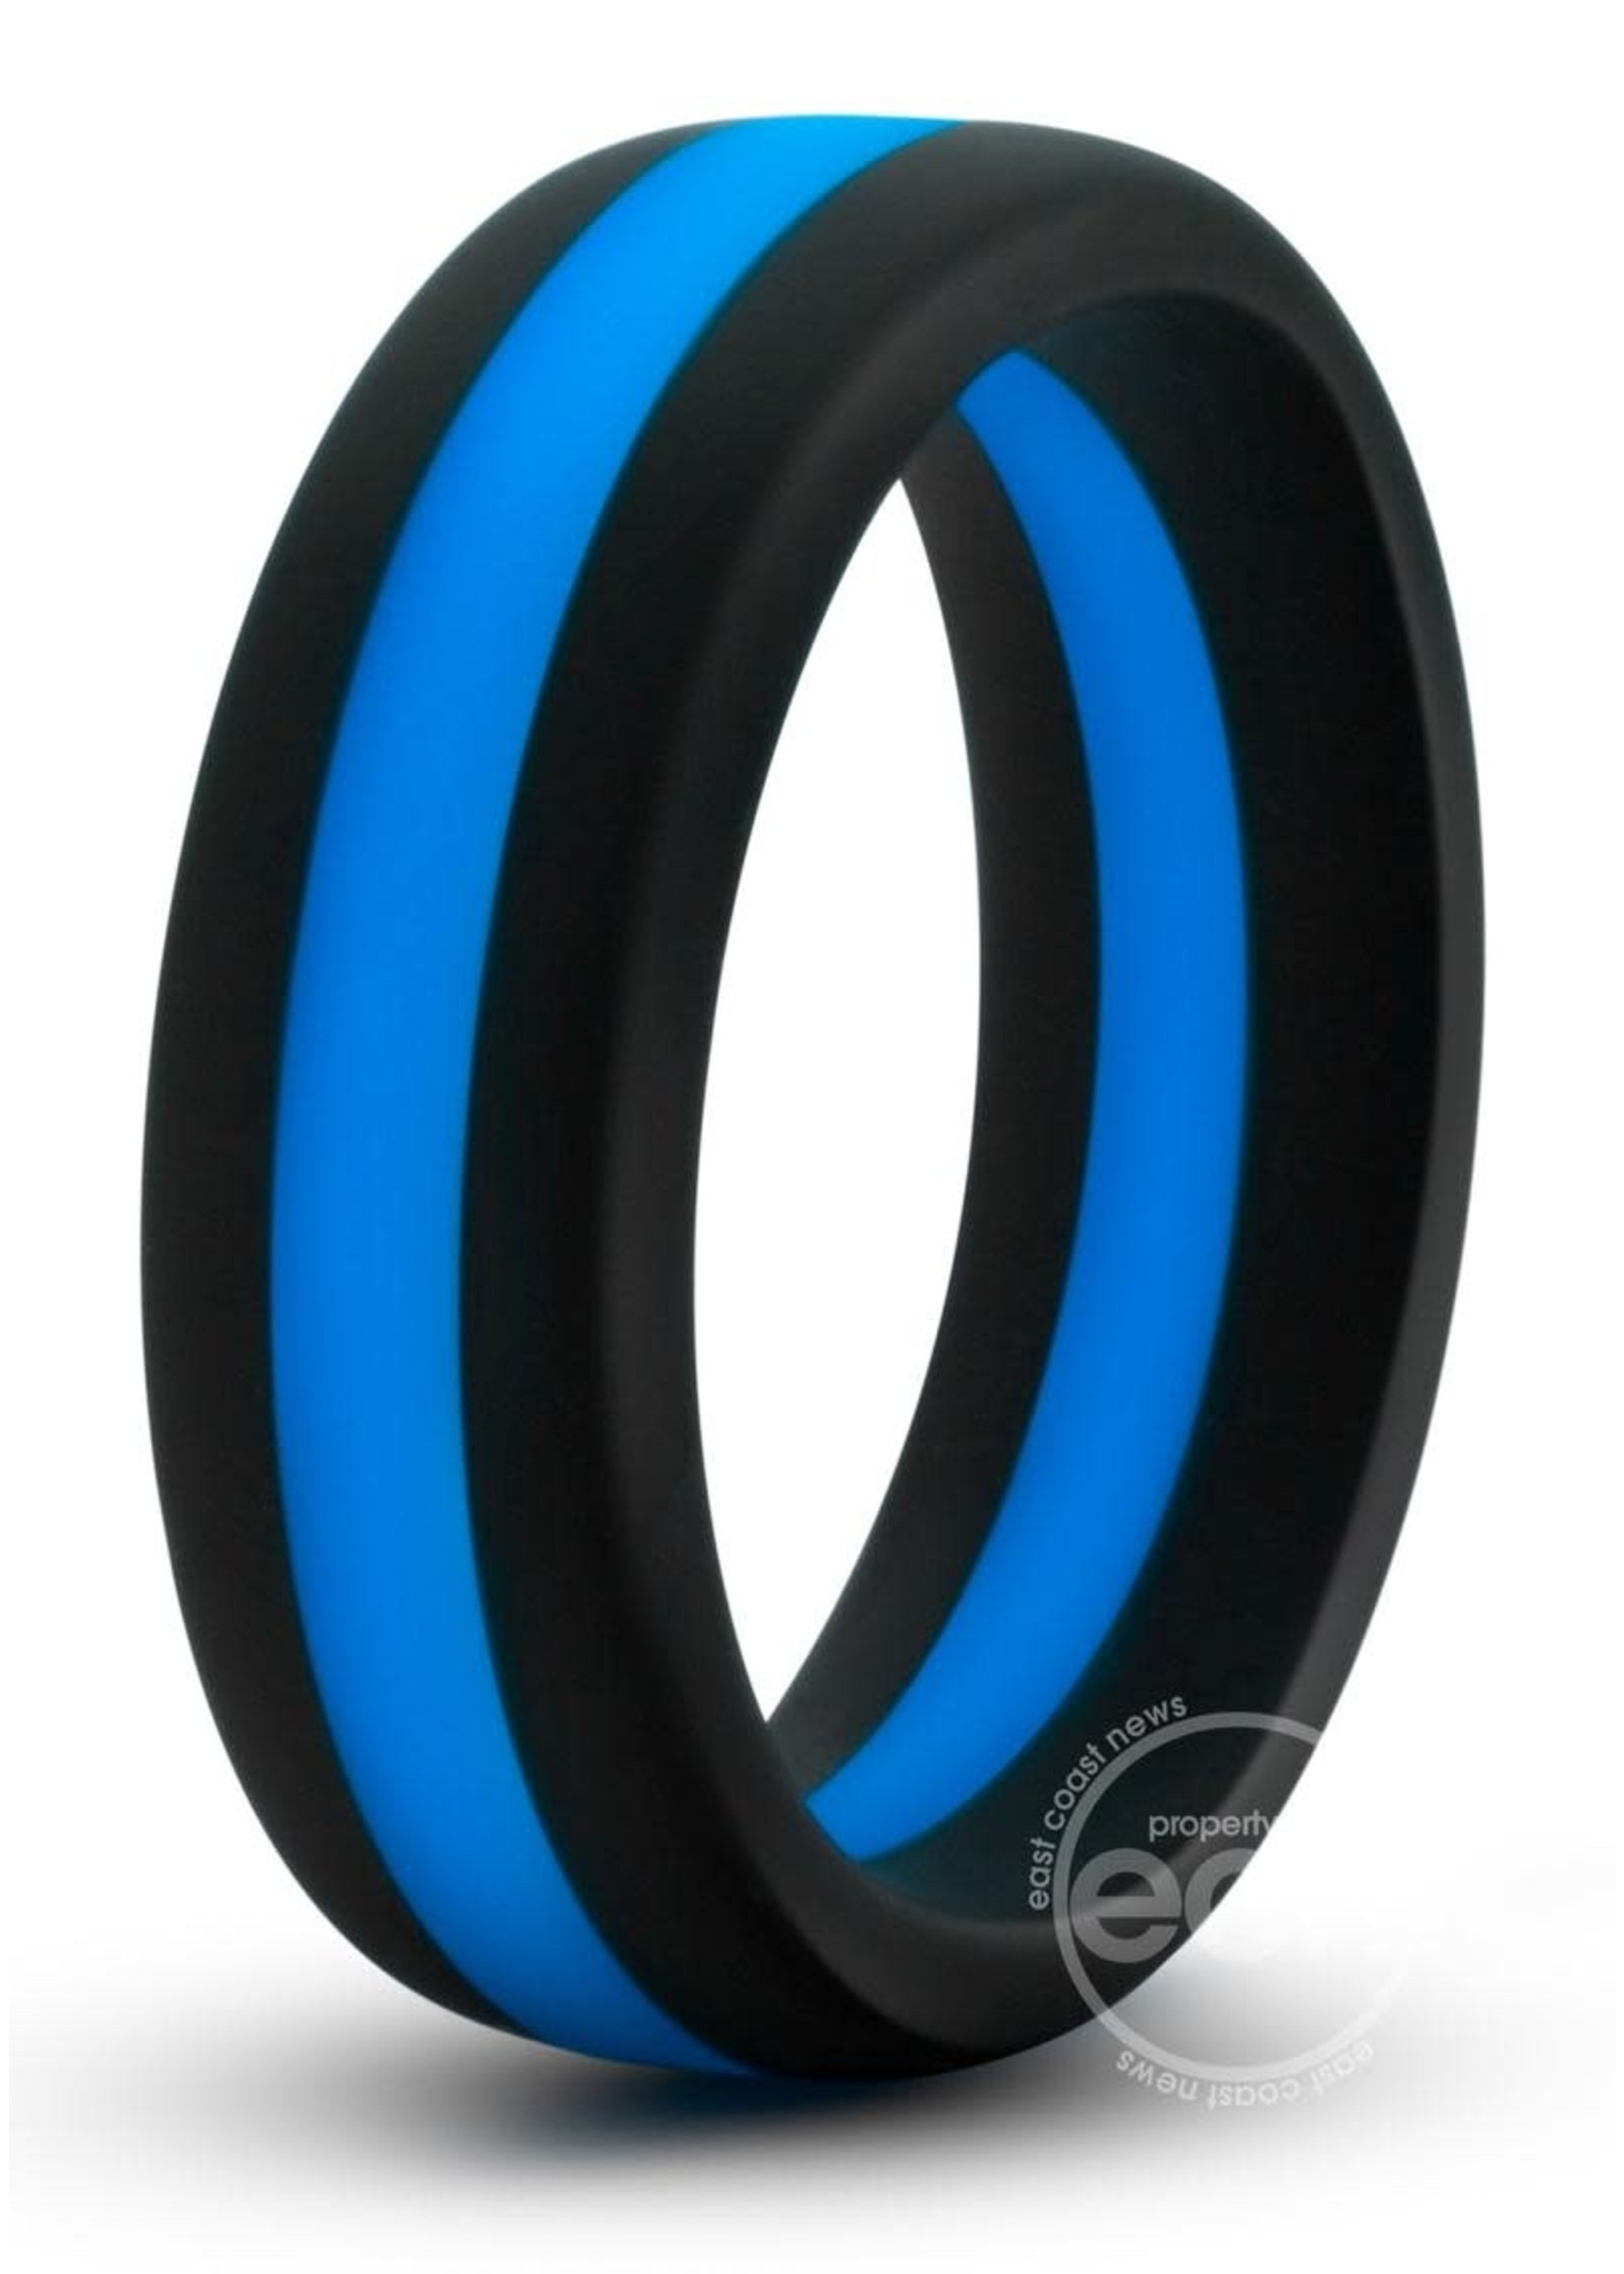 Performance Silicone Go Pro Cock Ring